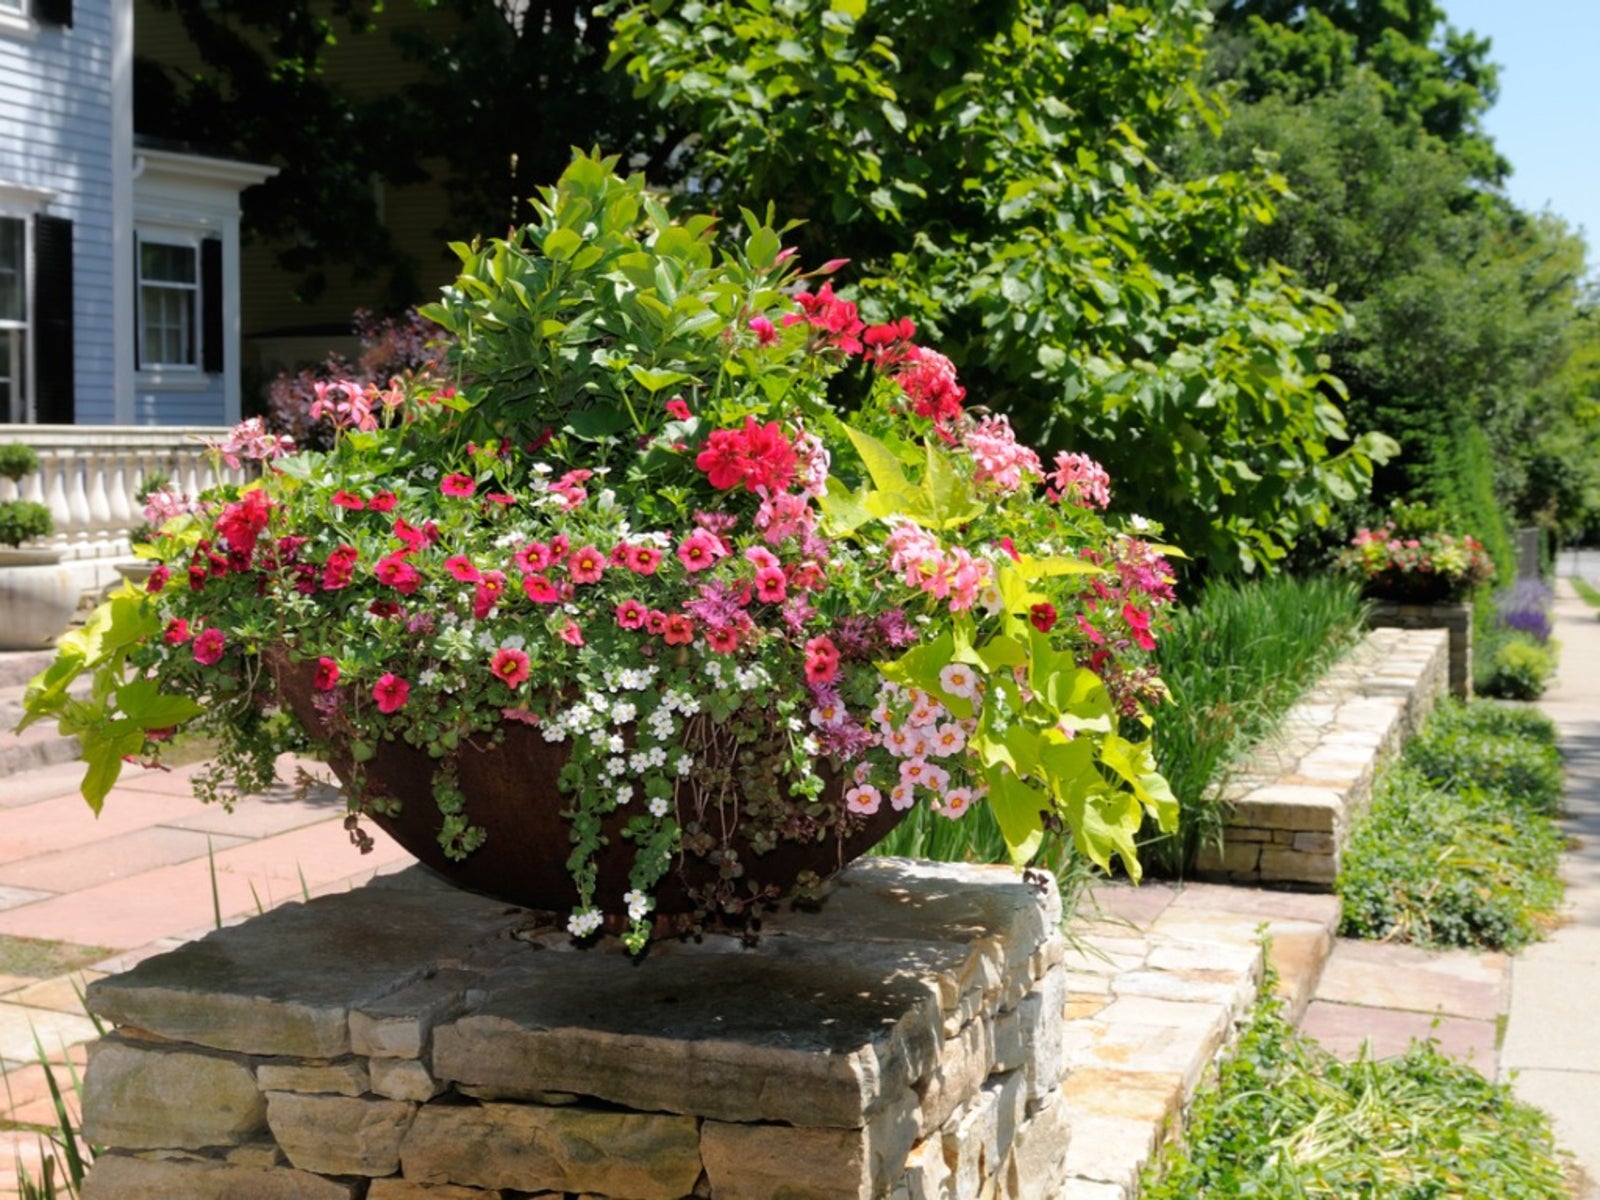 Thriller, spiller, filler: how to plant up containers successfully